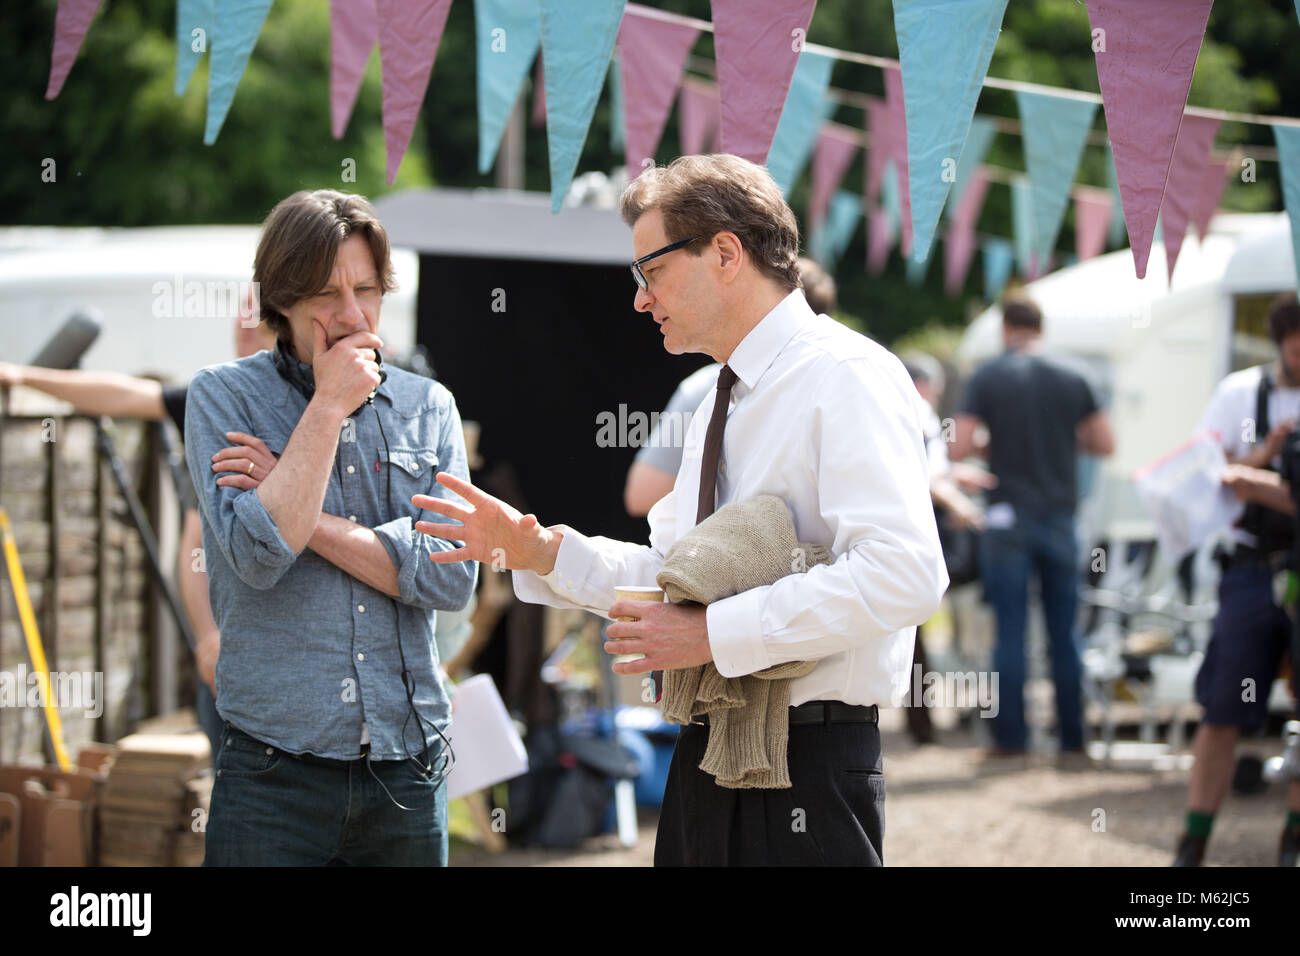 RELEASE DATE: 2018 TITLE: The Mercy STUDIO: Lionsgate DIRECTOR: James Marsh PLOT: Yachtsman Donald Crowhurst's disastrous attempt to win the 1968 Golden Globe Race ends up with him creating an outrageous account of traveling the world alone by sea. STARRING: JAMES MARSH, COLIN FIRTH on set. (Credit Image: © Lionsgate/Entertainment Pictures) Stock Photo